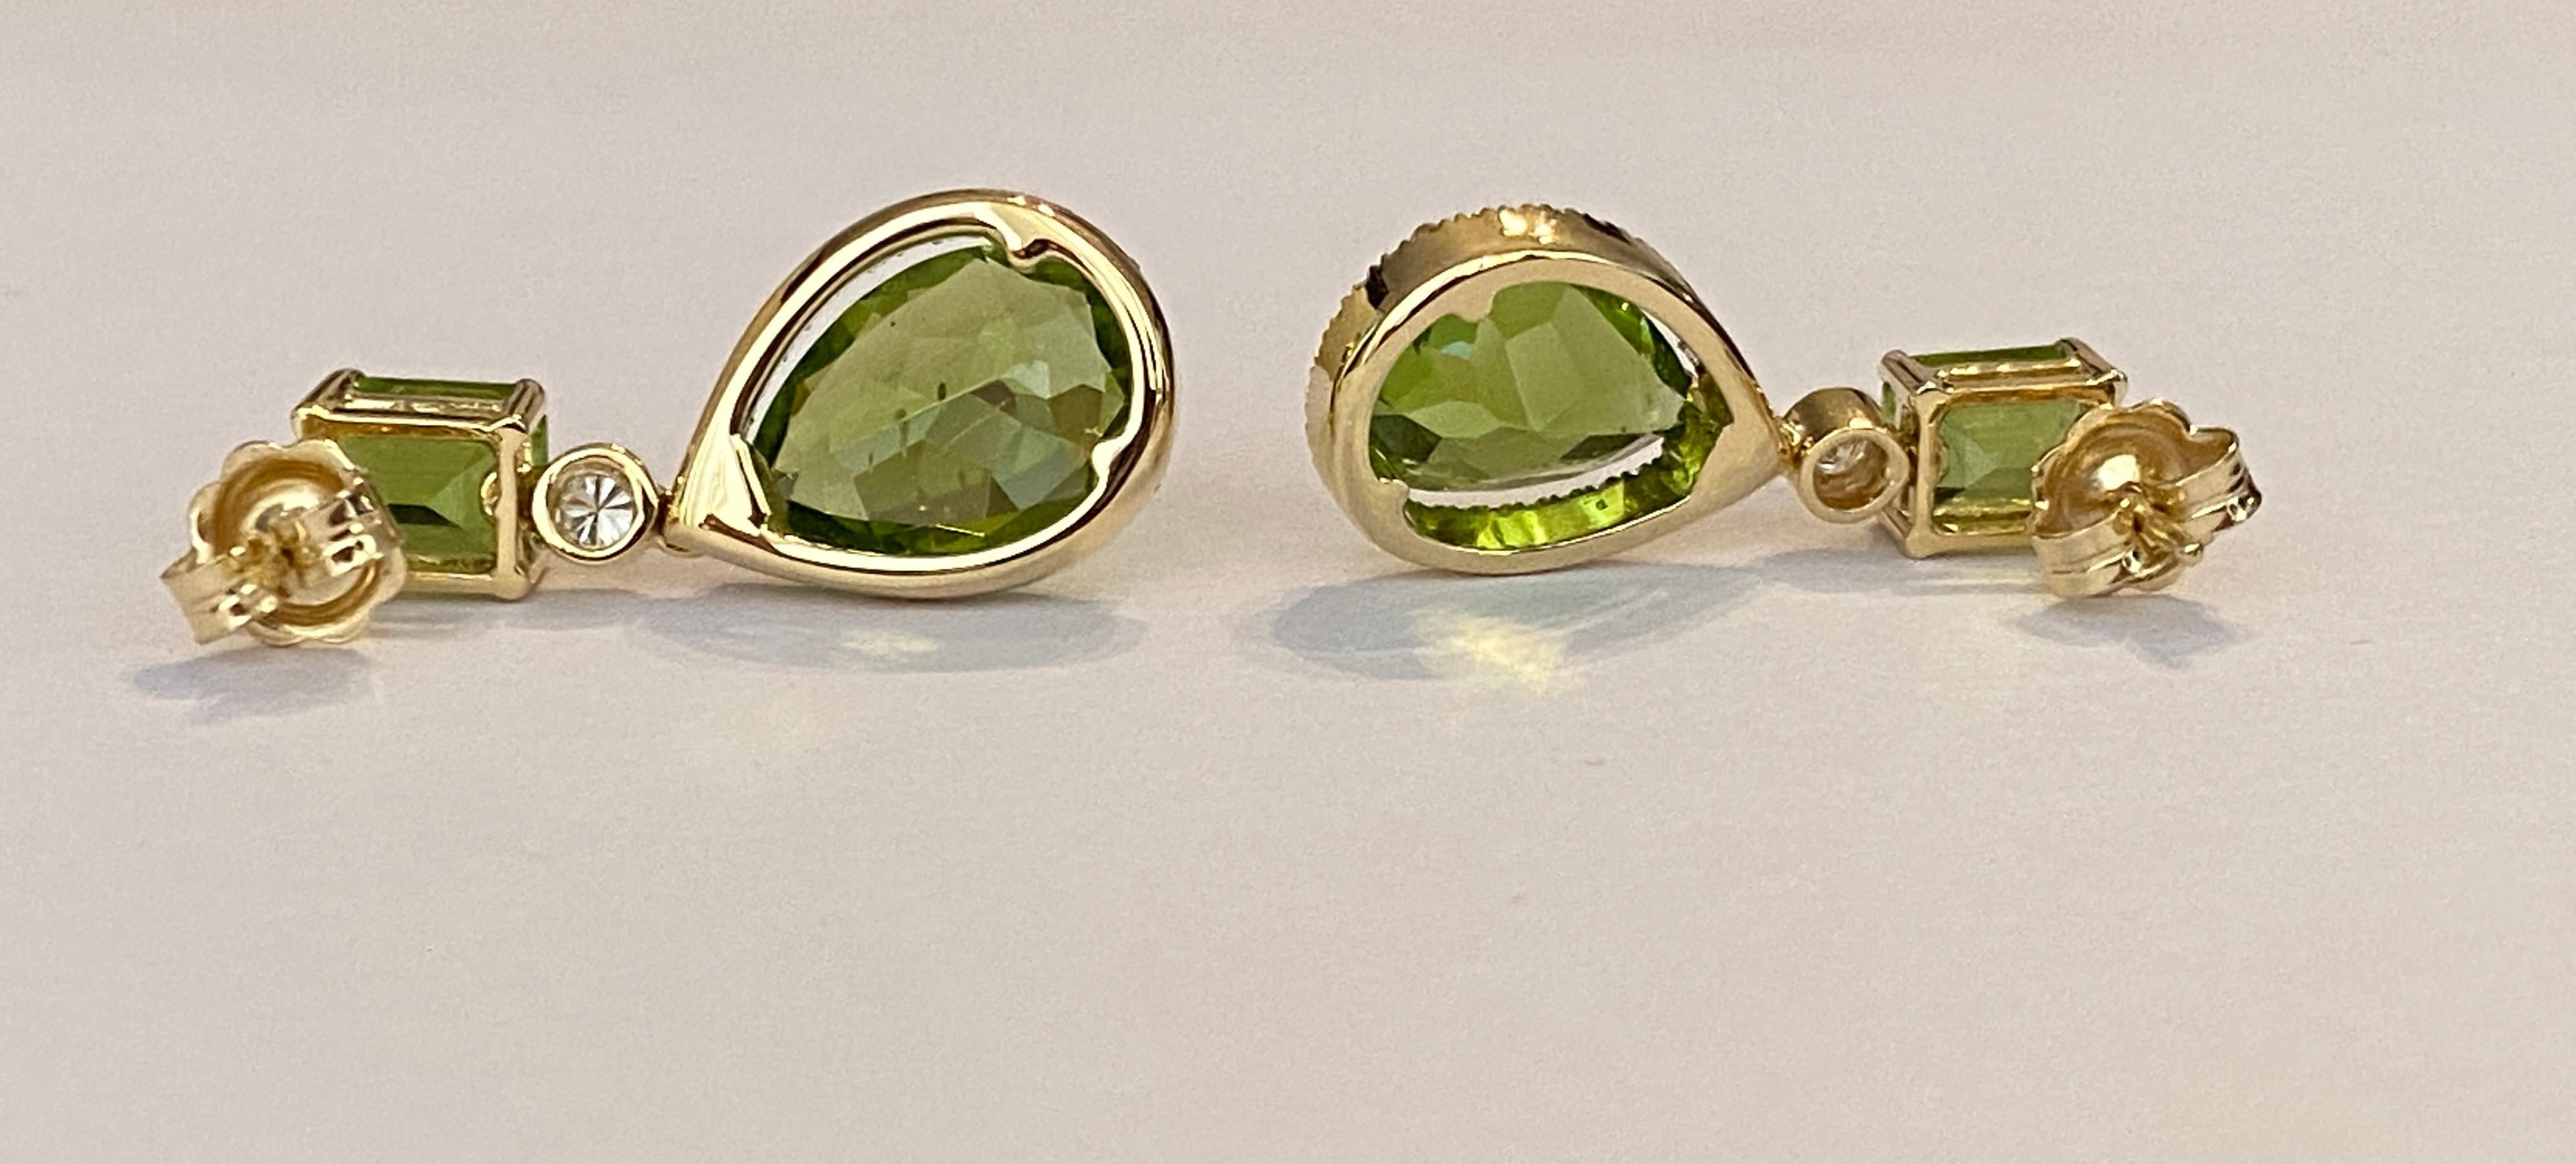 ALGT certified 18 kt gold Peridot Earrings with Diamonds For Sale 6